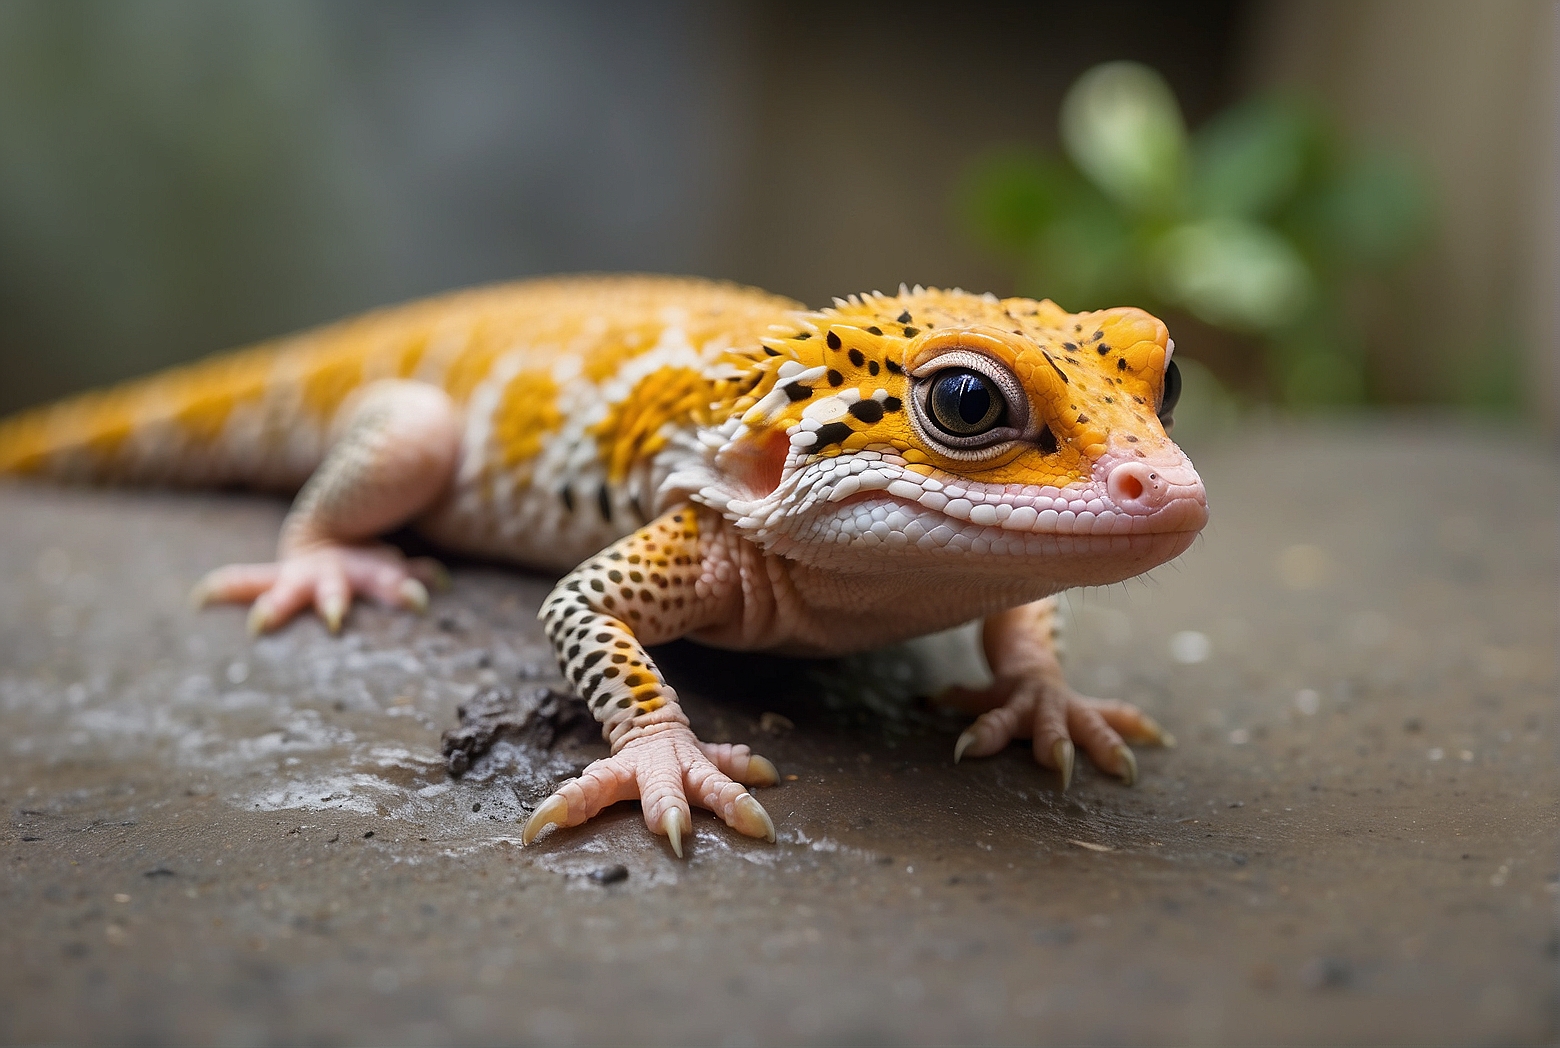 Do I Have To Wash My Hands After Holding A Leopard Gecko?